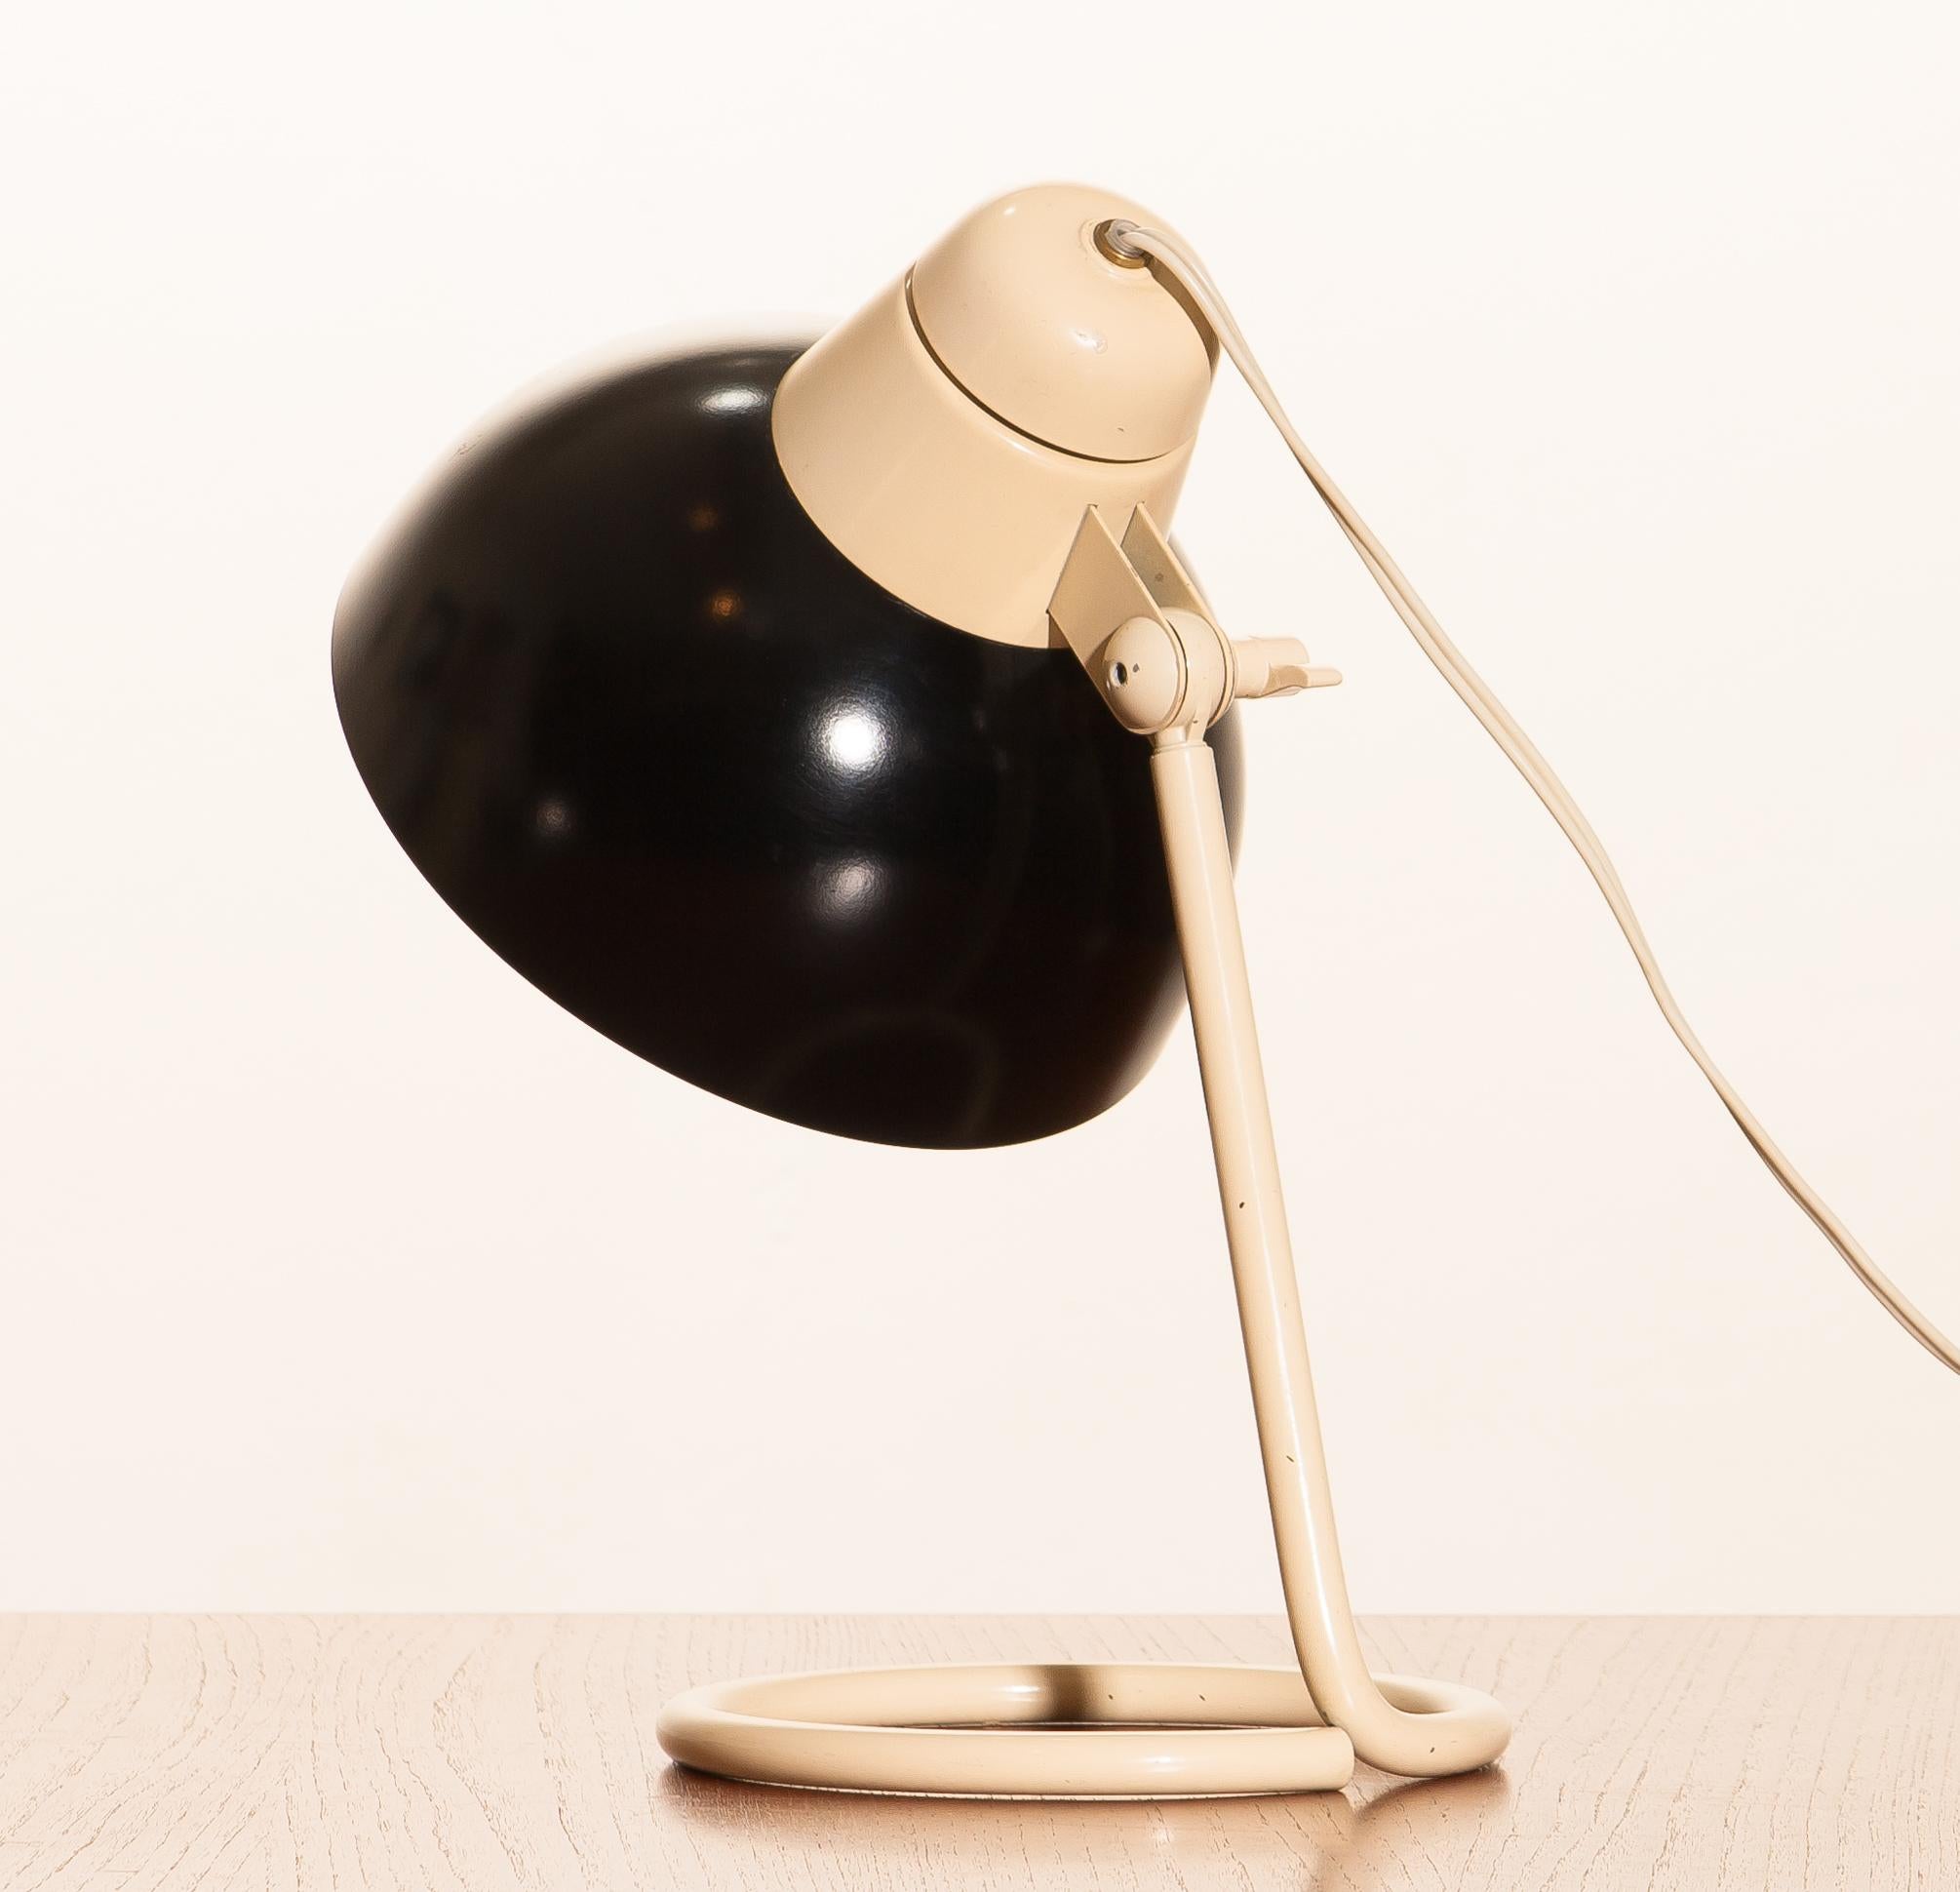 Dutch 1950s, Philips Metal Desk or Table Lamp in Off-White and Black